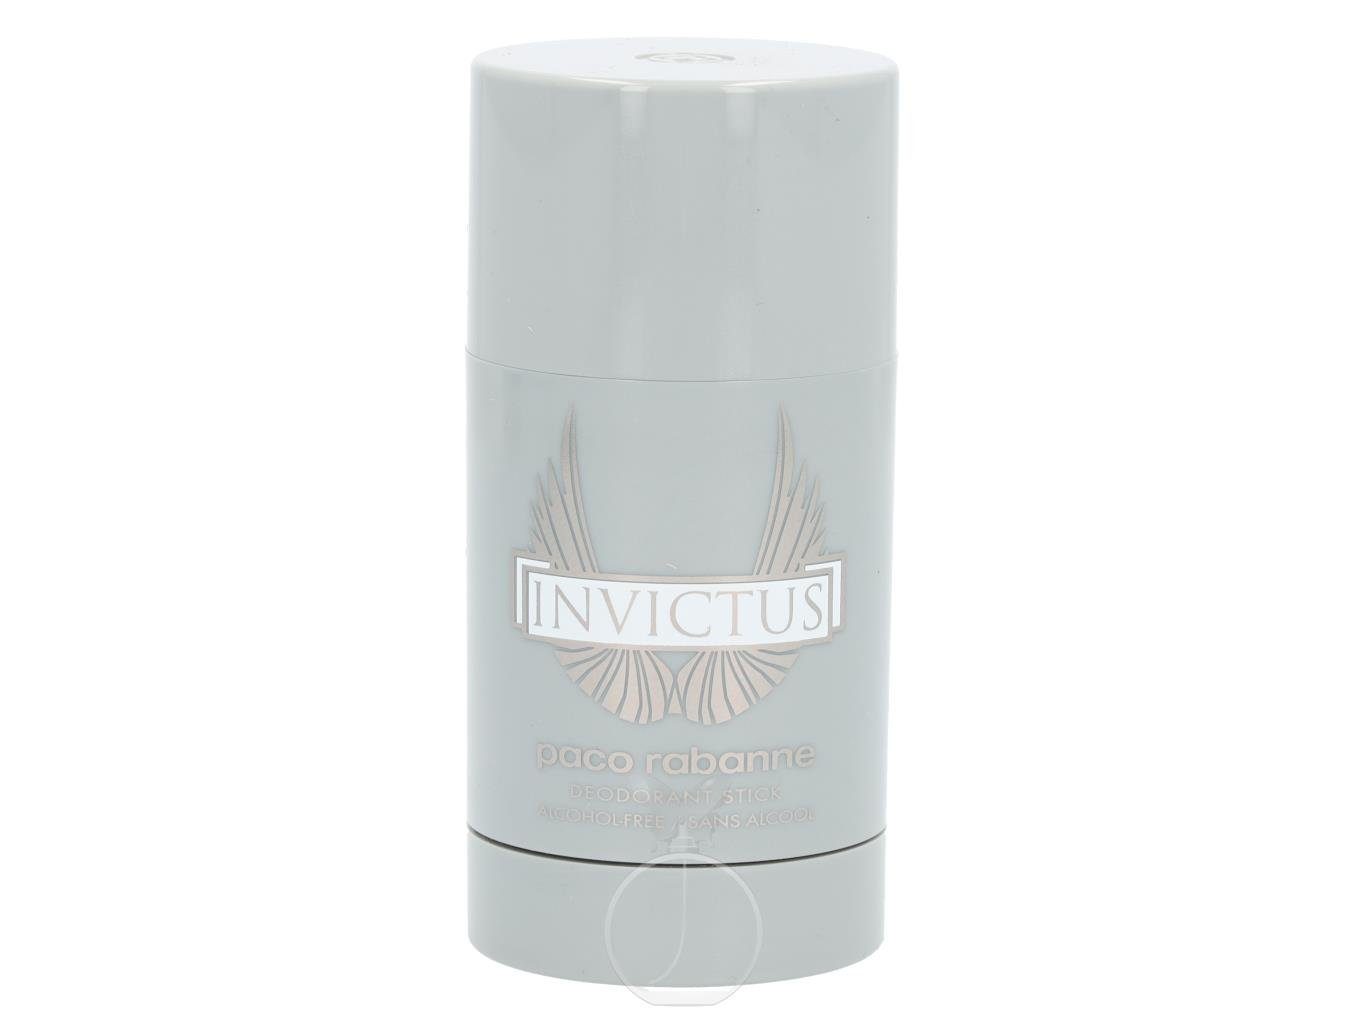 75 ml, Invictus paco rabanne Deo-Stift Packung Deostick paco rabanne